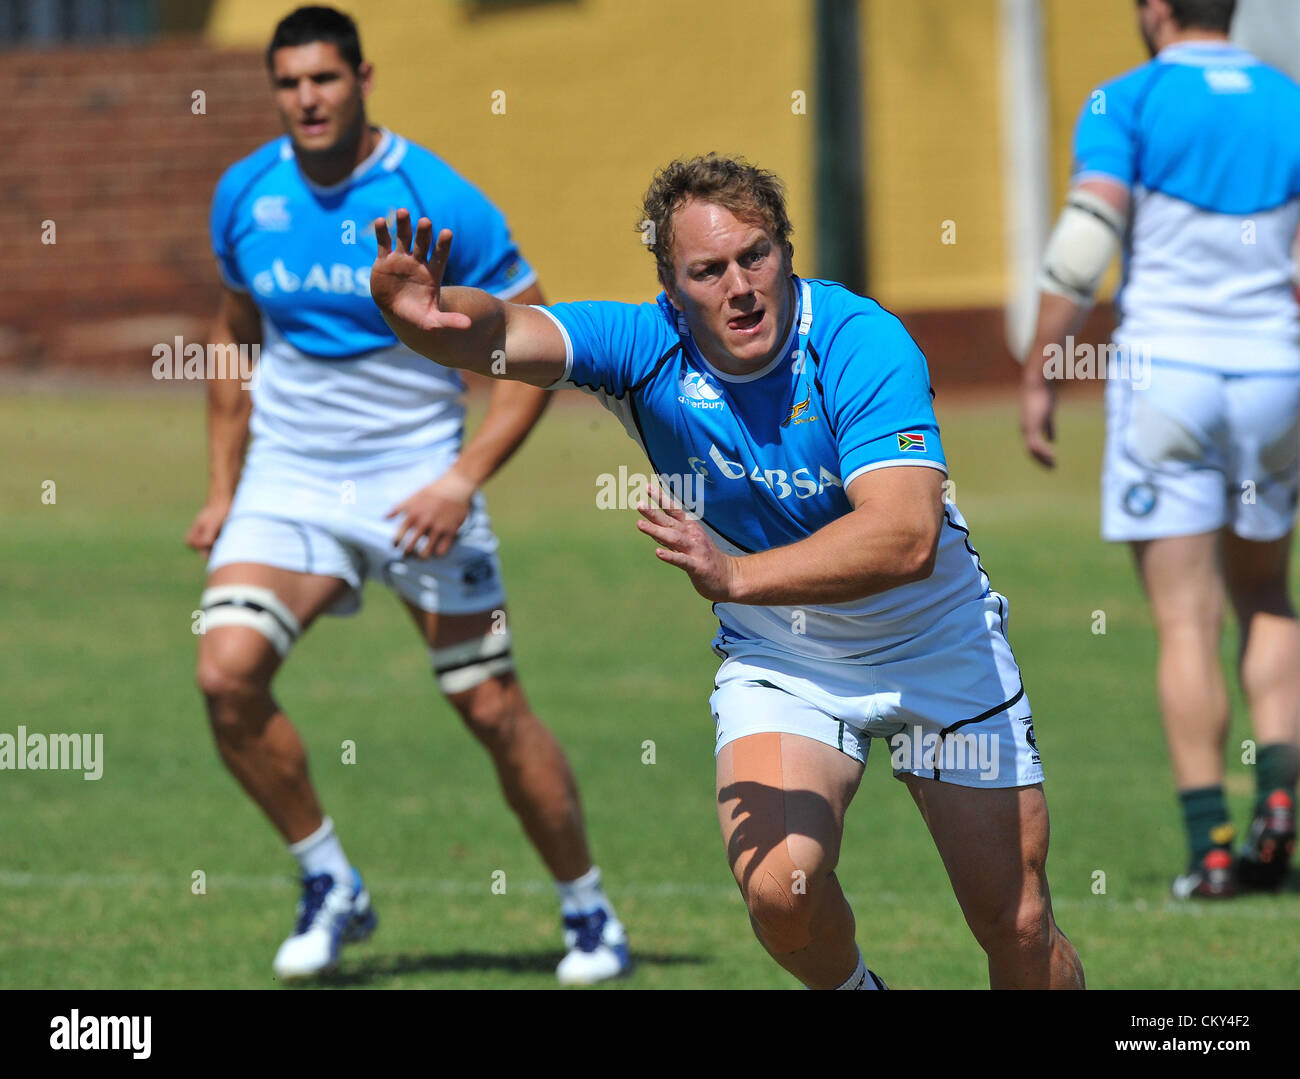 JOHANNESBURG, SOUTH AFRICA - SEPTEMBER 01, Patrick Cilliers waits for the ball during the South African national rugby team field session and media conference at KES on September 01, 2012 in Johannesburg, South Africa Photo by Duif du Toit / Gallo Images Stock Photo